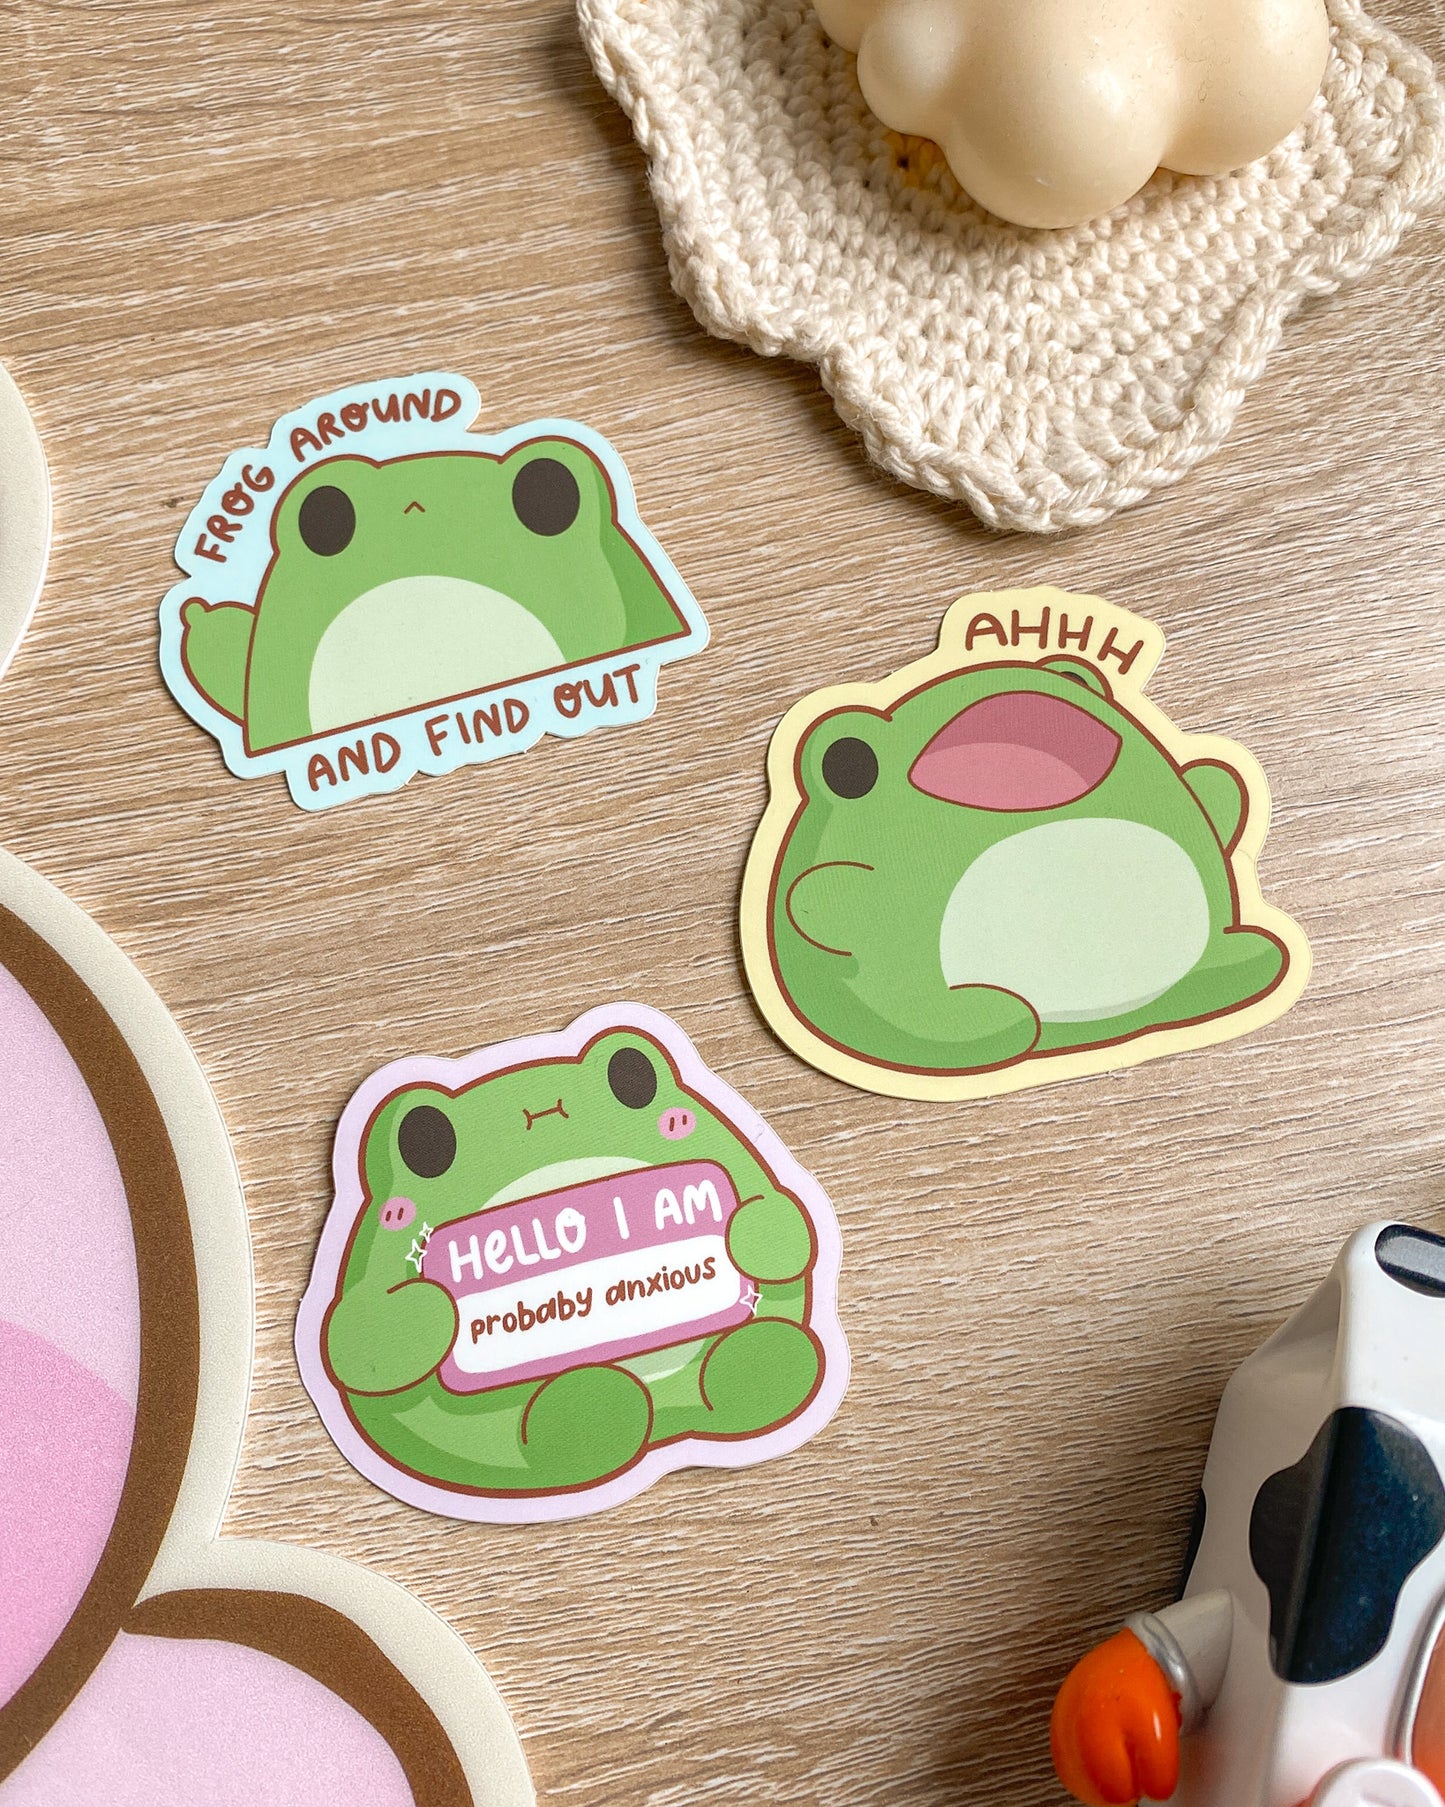 Hello I'm Probably Anxious Frog Sticker